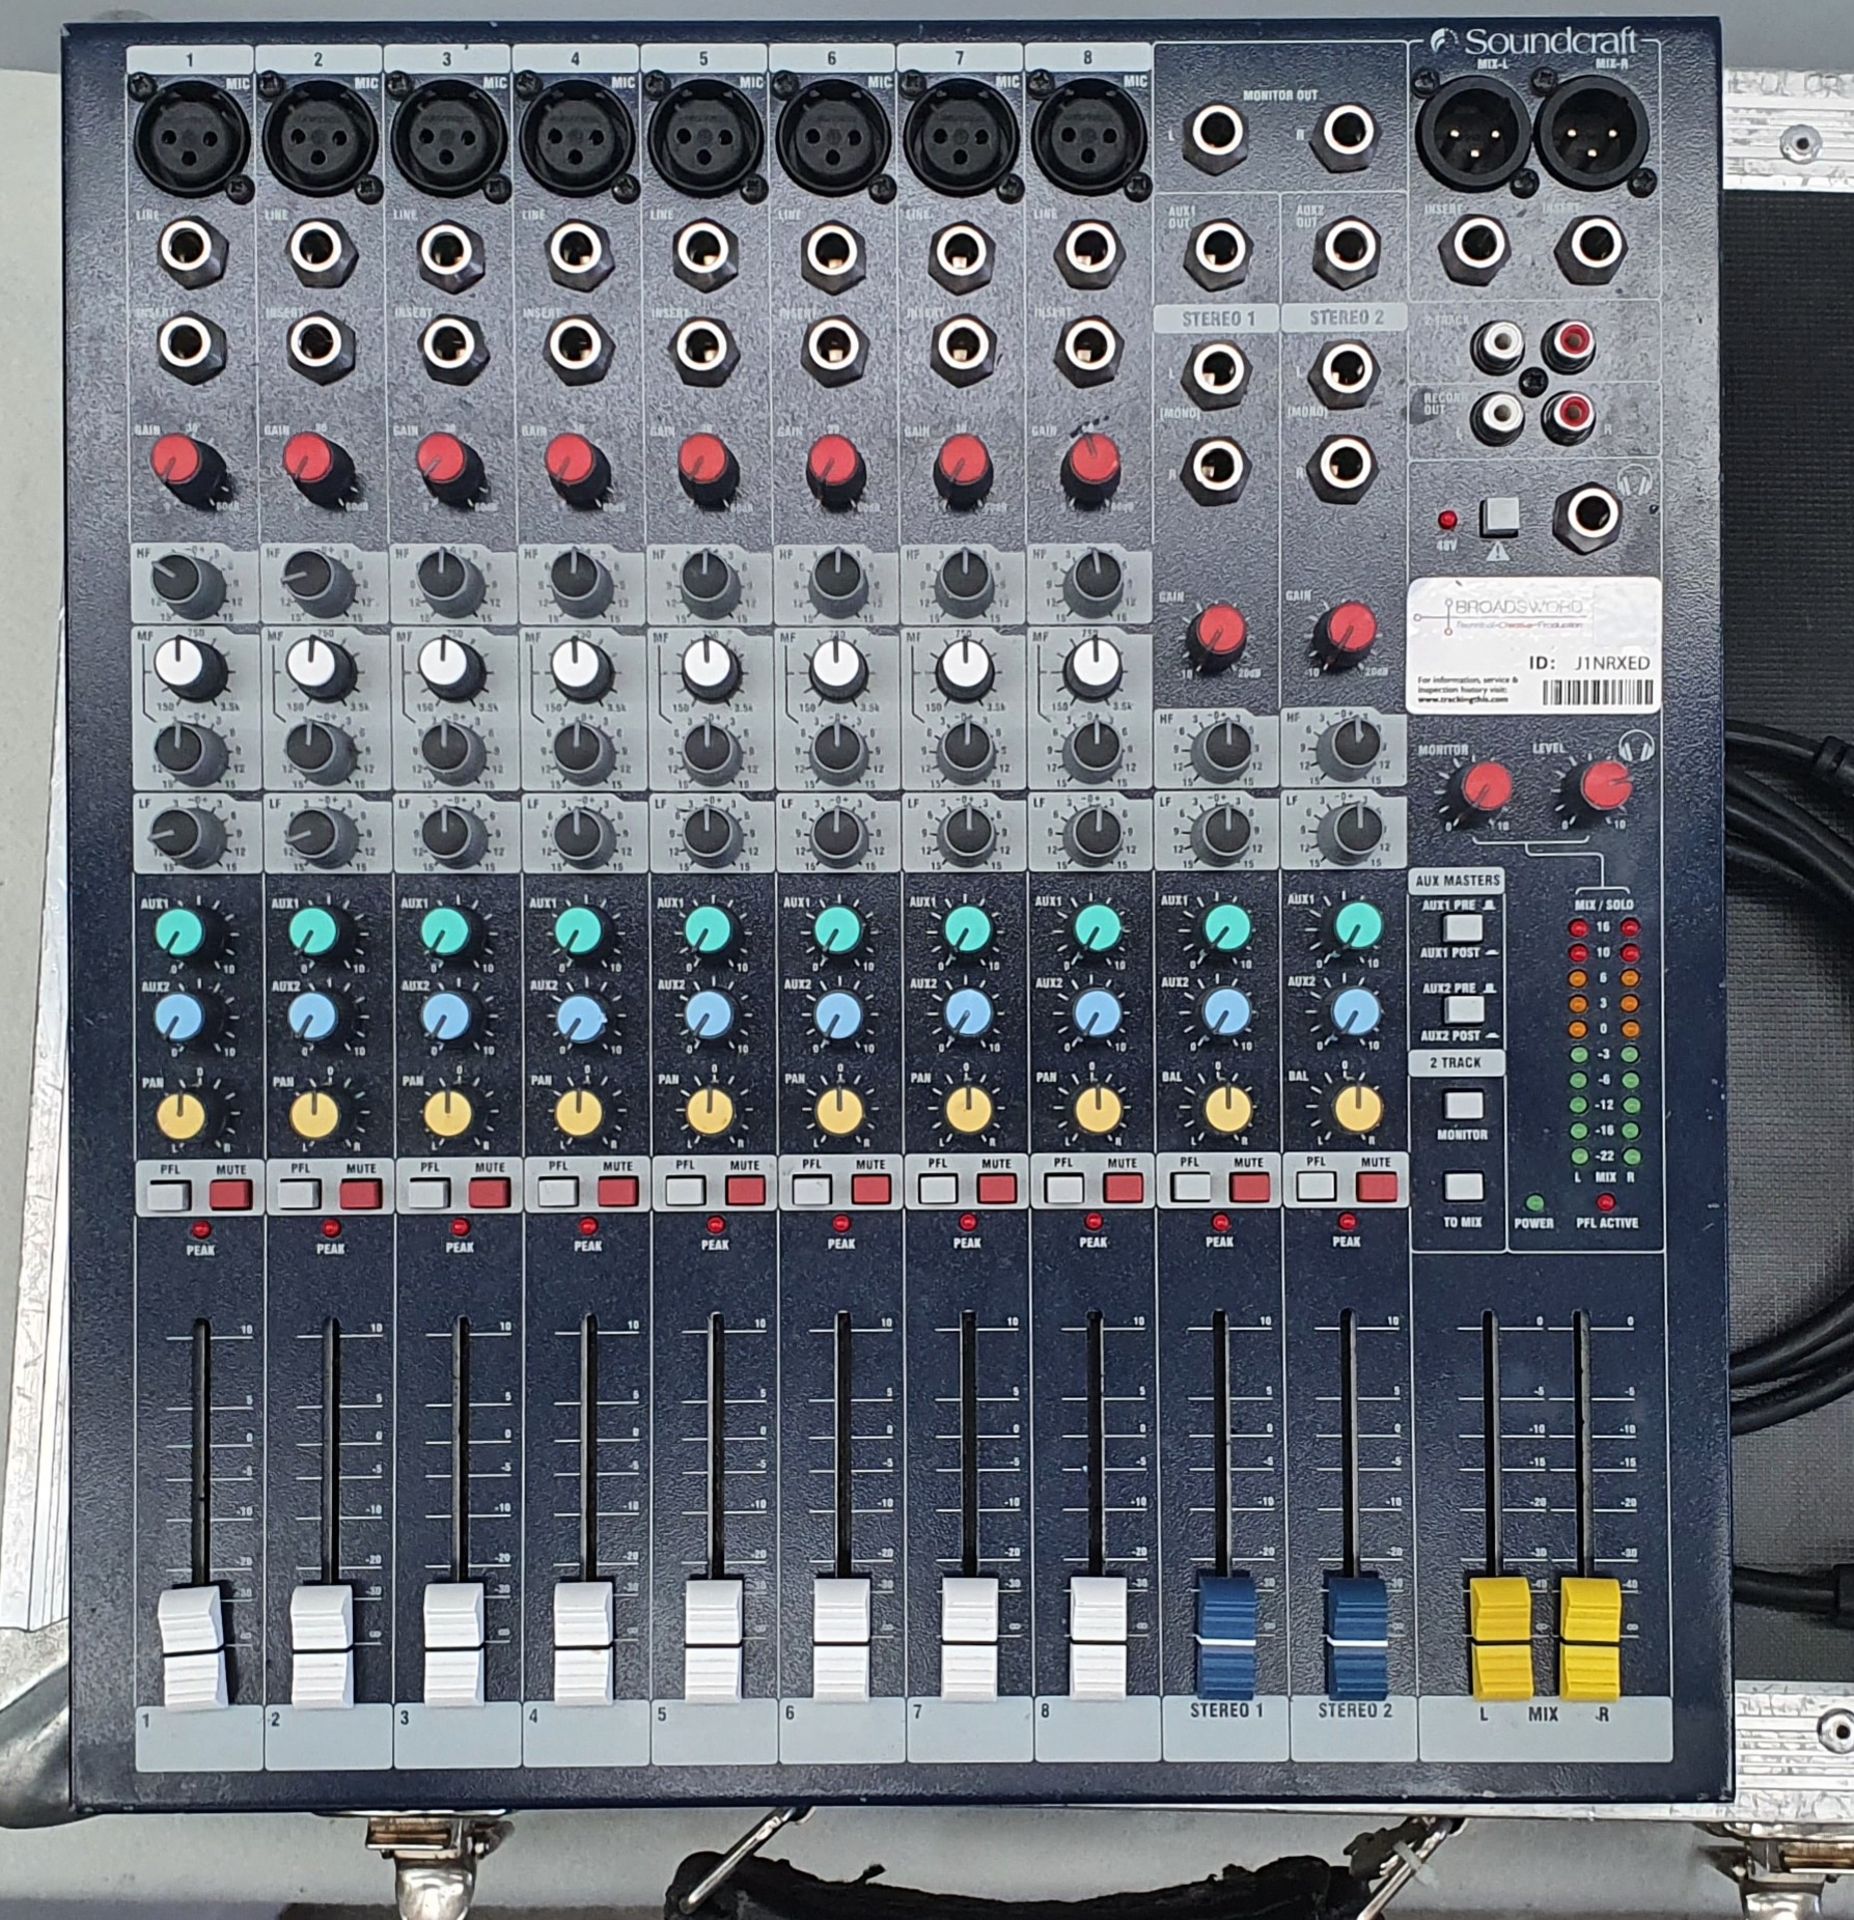 A Soundcraft EPM8 8 Channel Mixer Sound Mixing Desk with Road Ready Flight Case, 475mm x 390mm x - Image 2 of 2